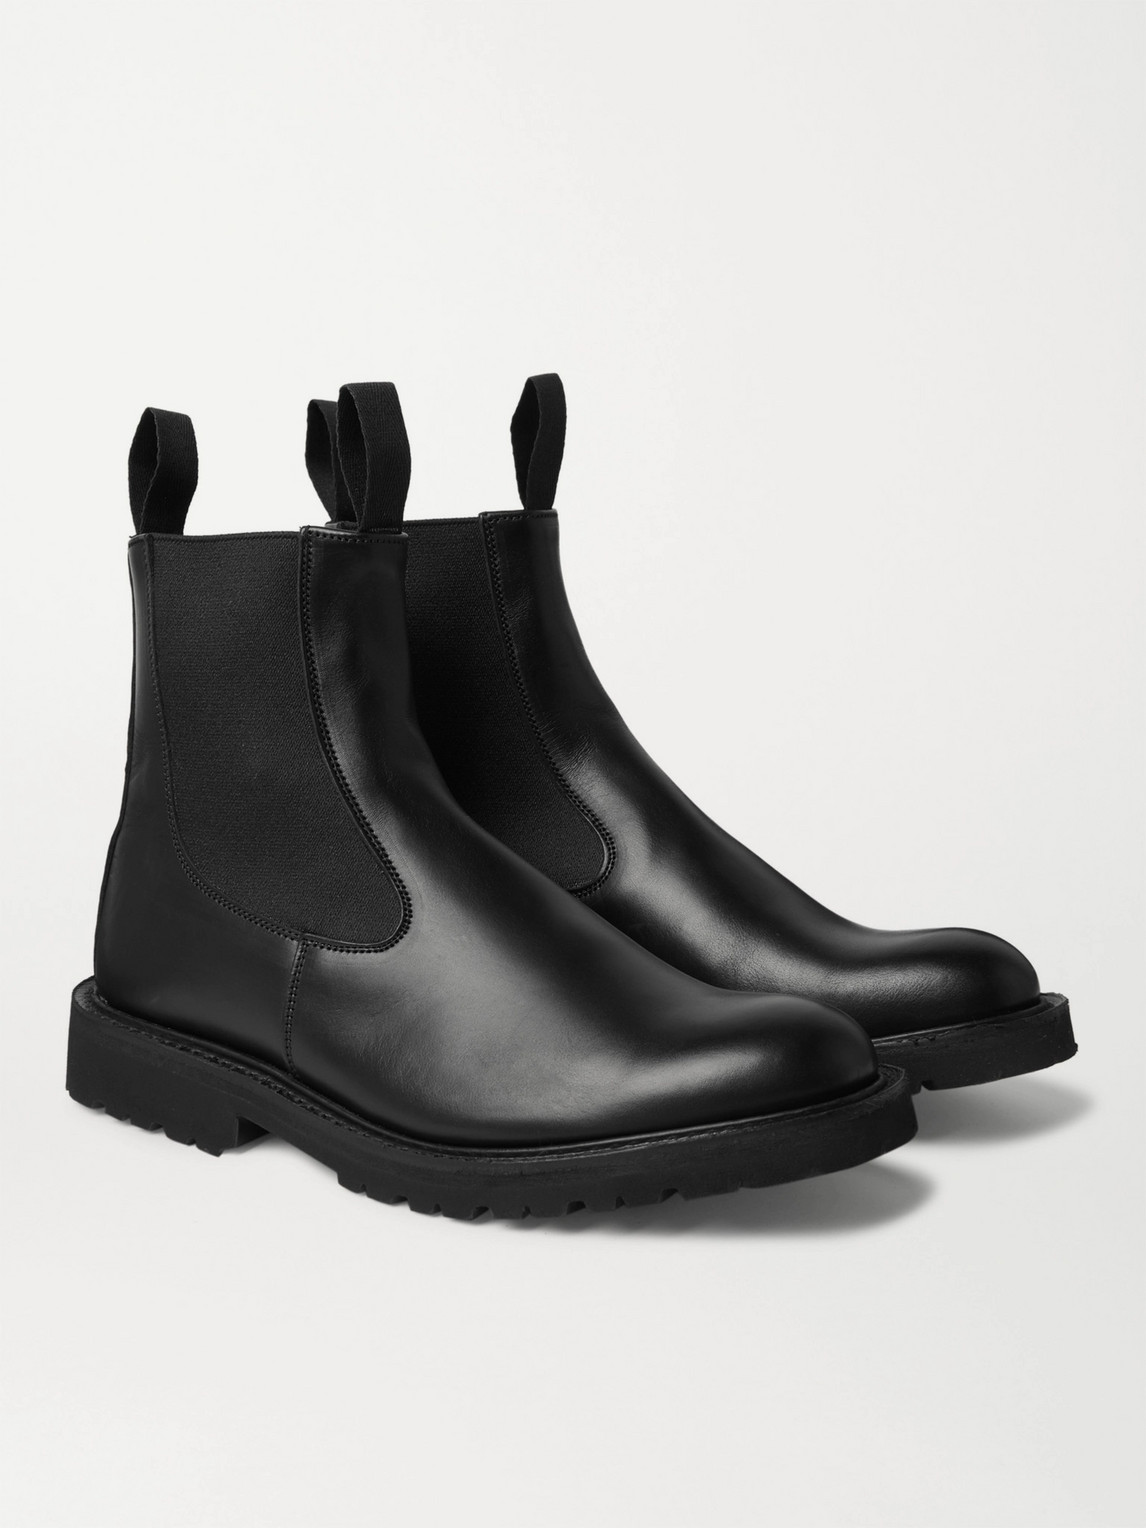 TRICKER'S STEPHEN LEATHER CHELSEA BOOTS